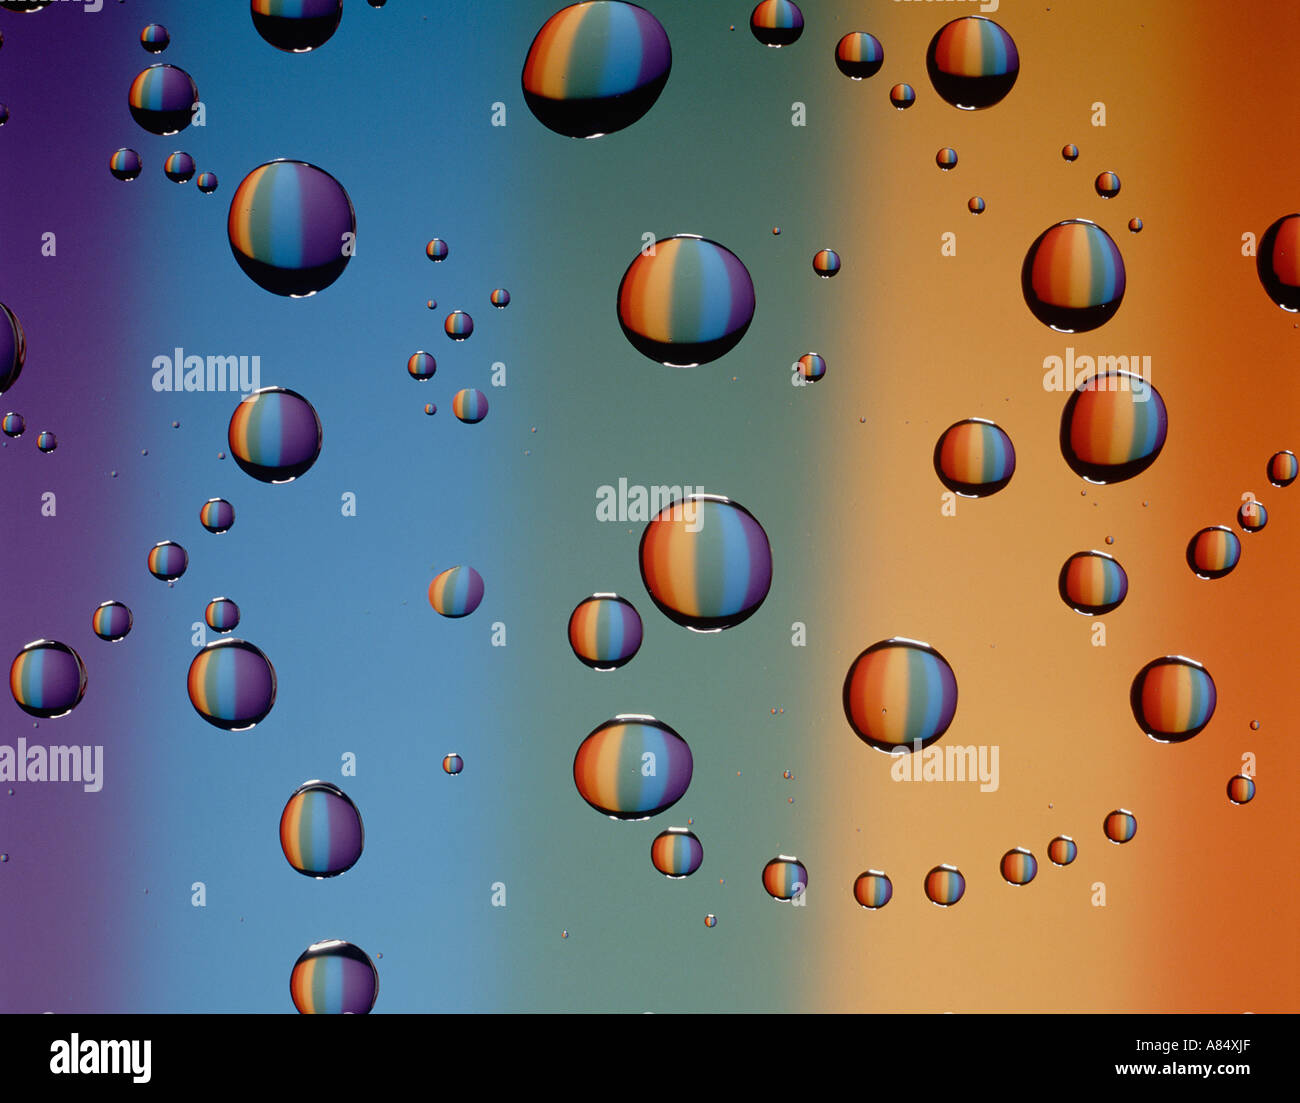 Still life close-up of water droplets on glass surface against backdrop of spectral colours. Stock Photo